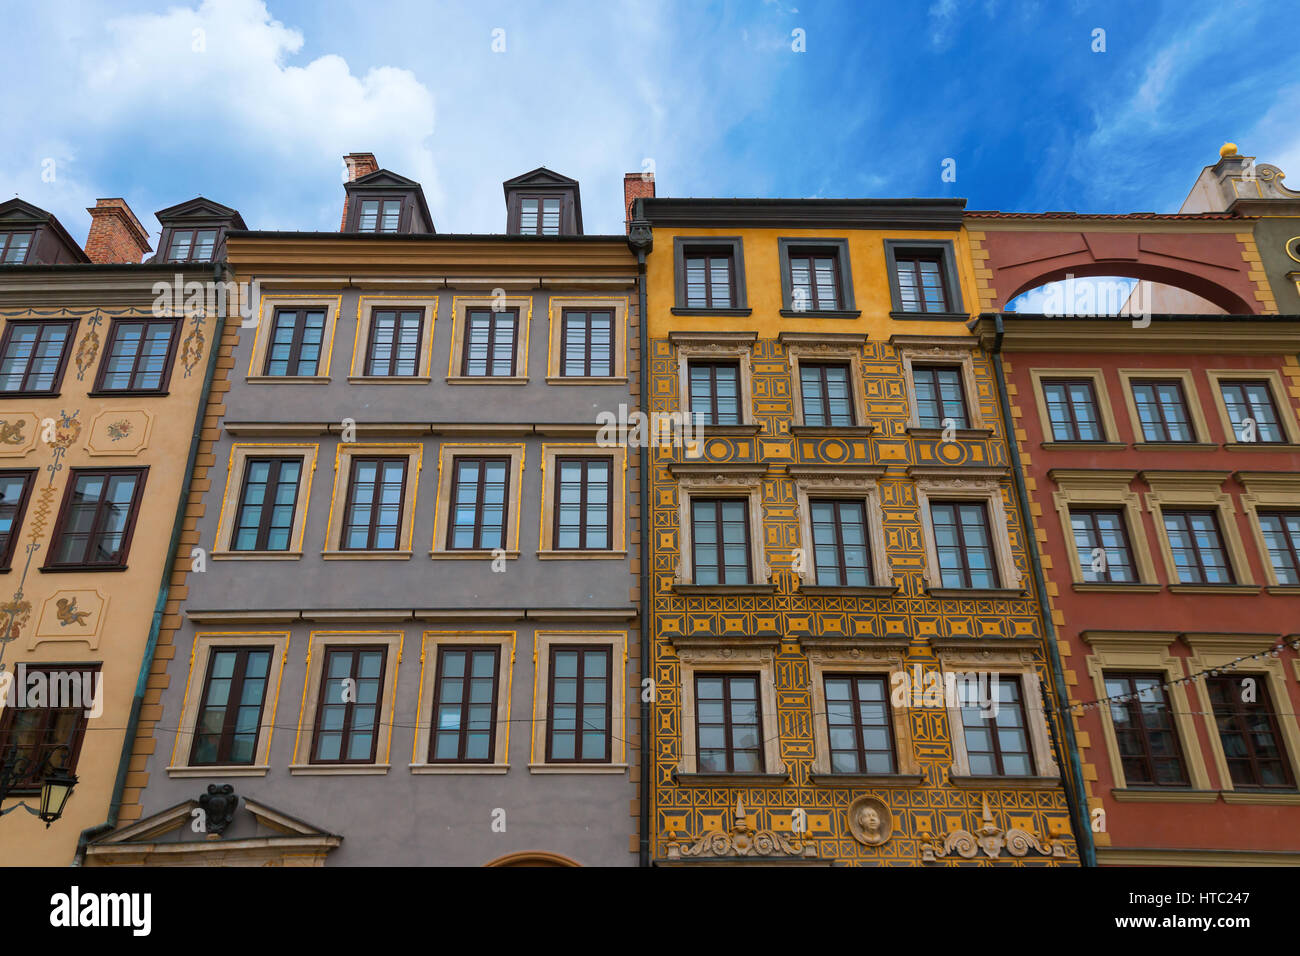 Old, landmarked buildings in the Old Town in Warsaw, Poland. Stock Photo